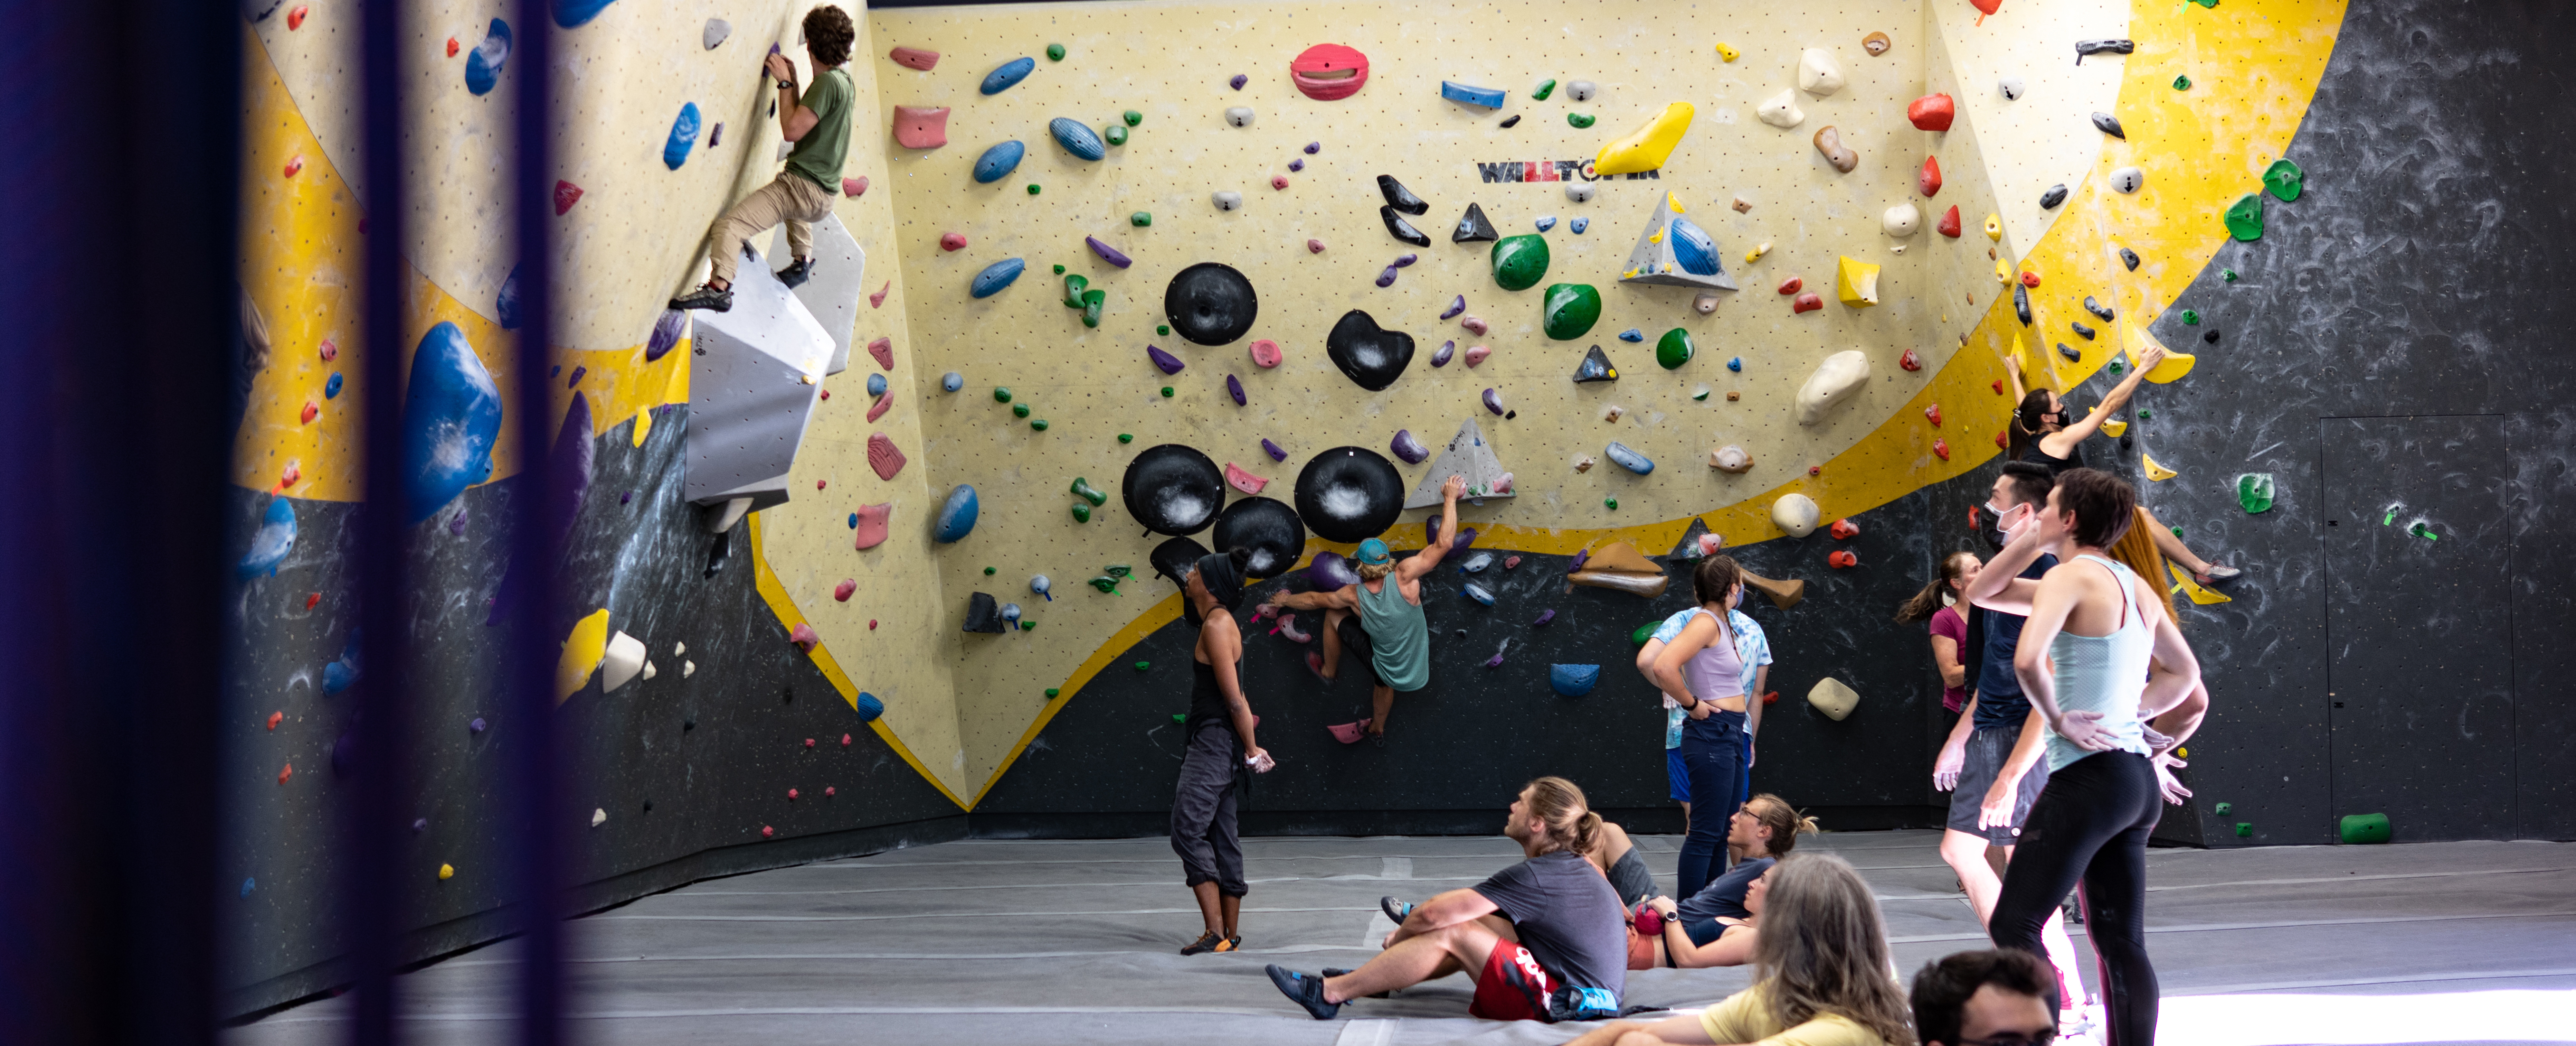 group of climbers gathered in bouldering area